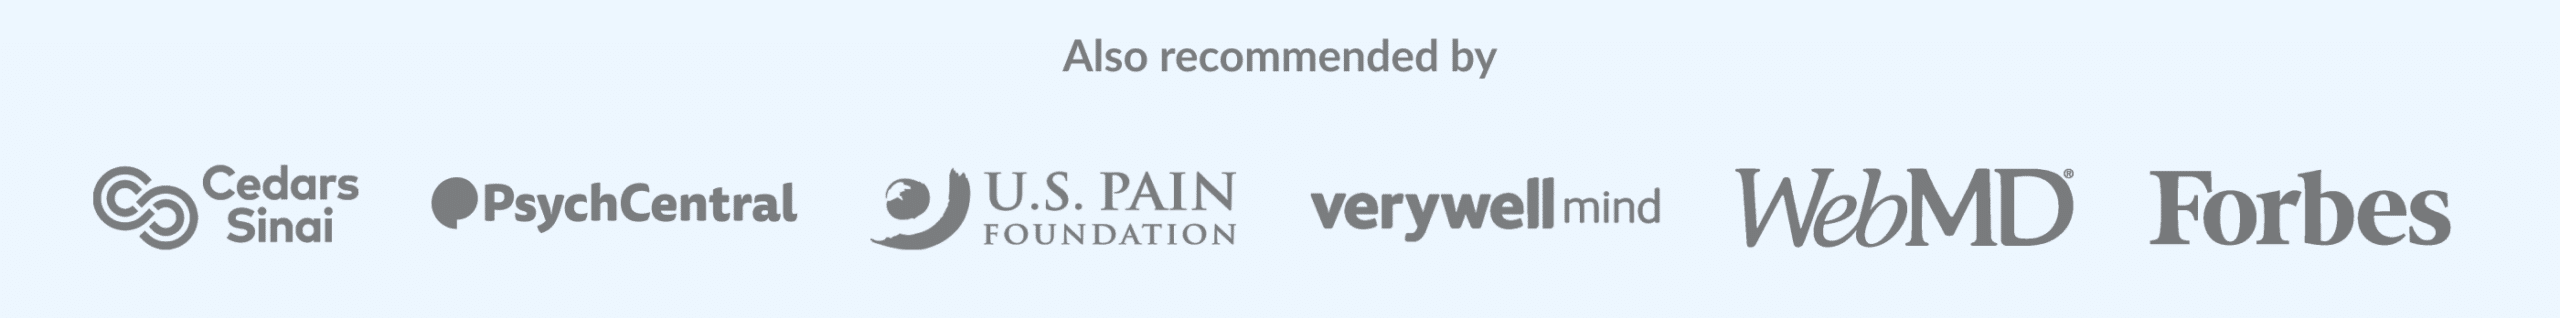 Bearable is recommended by Forbes, WebMD, VeryWellMind, & More